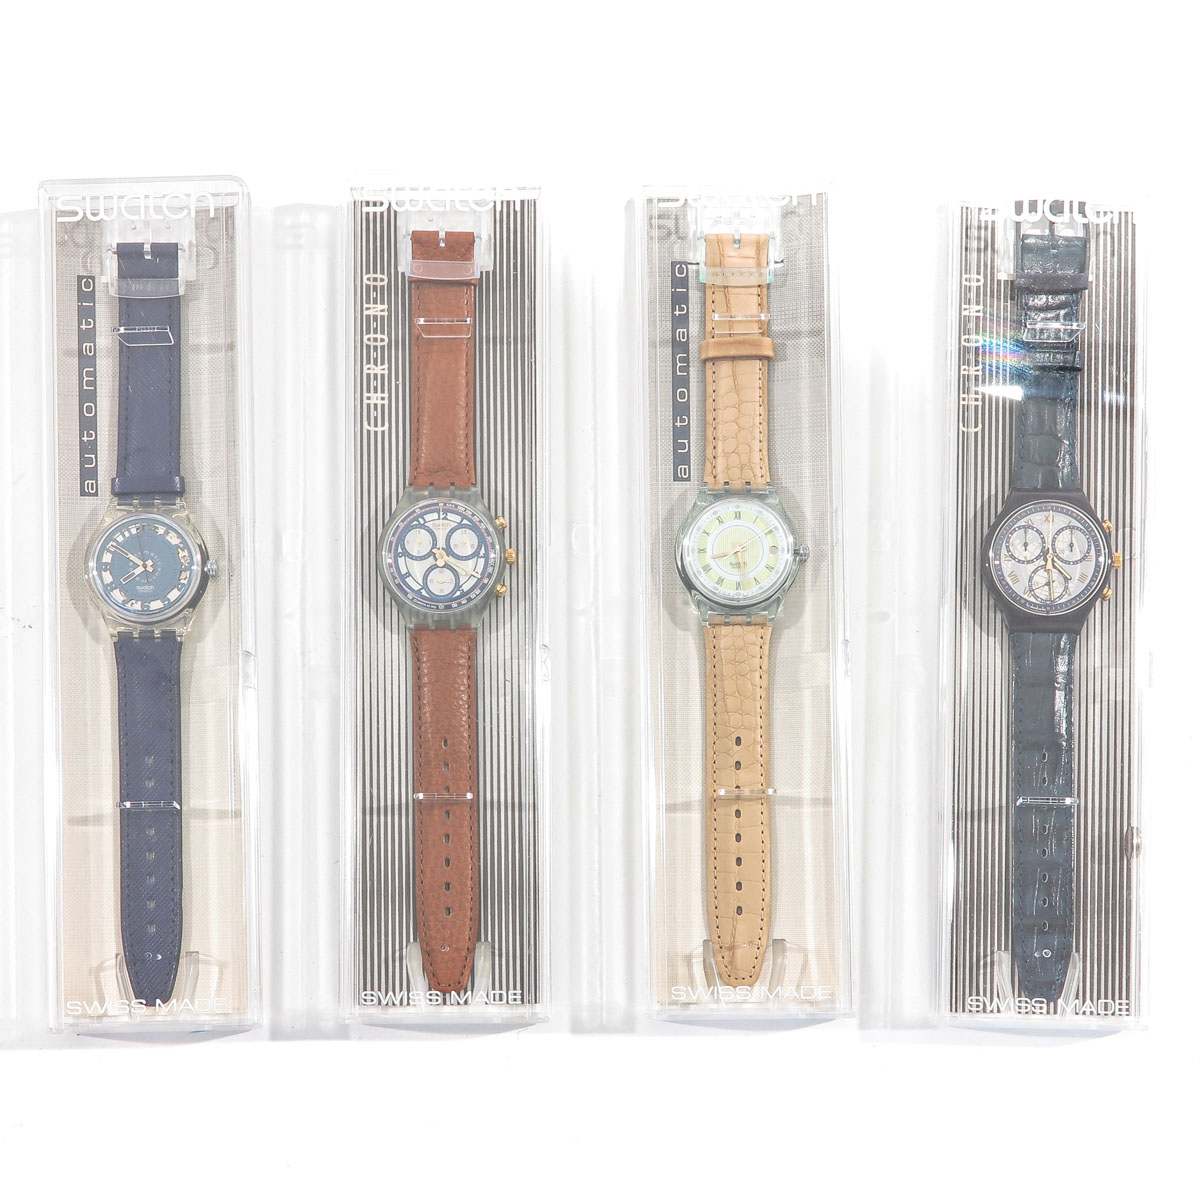 A Collection of 10 Swatch Watches - Image 3 of 8